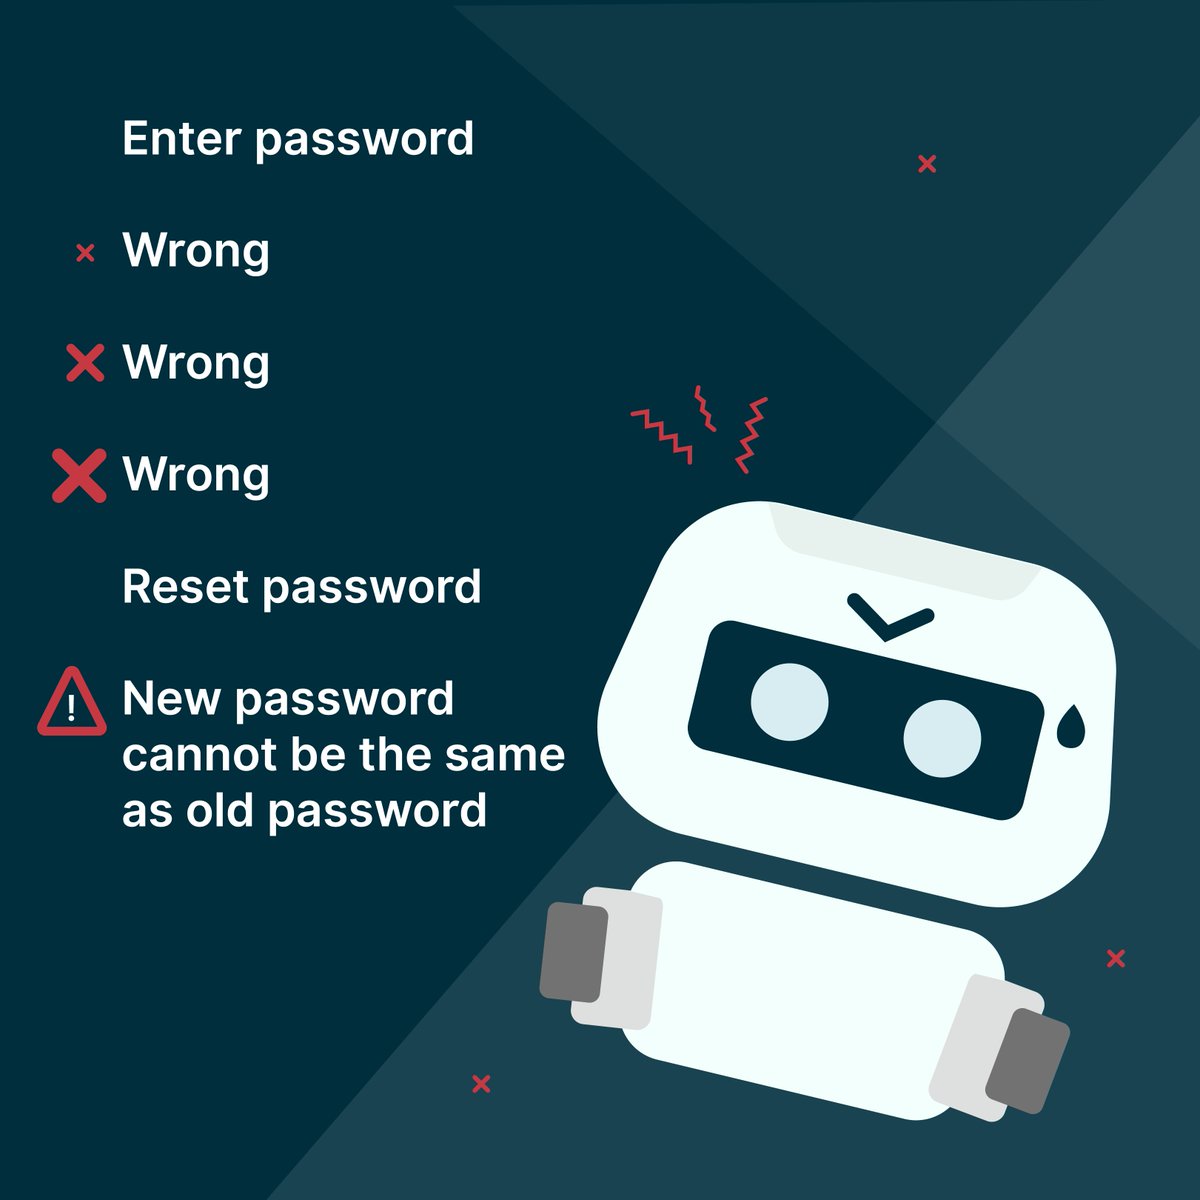 Can't just be us, right? 

#worldpasswordday #techsecurity #passwordsecurity #multifactorauthentication